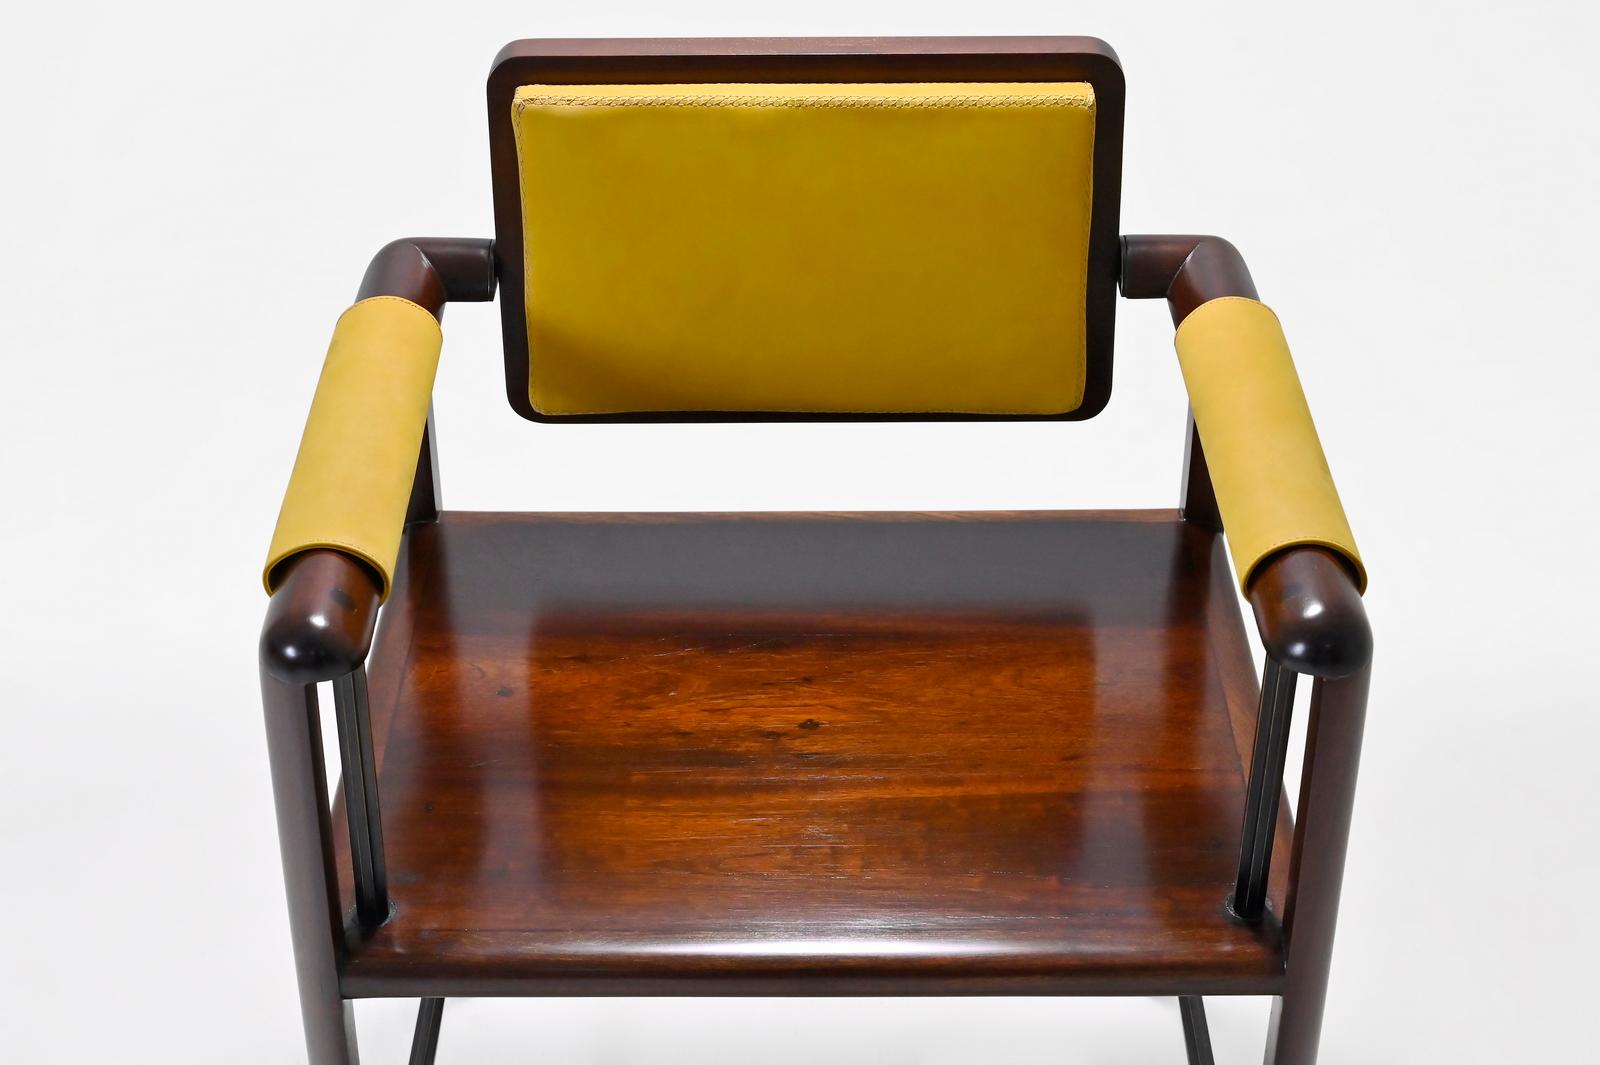 Bespoke Chair Reclaimed Hardwood Handstitched Leather Seating, P. Tendercool In New Condition For Sale In Bangkok, TH